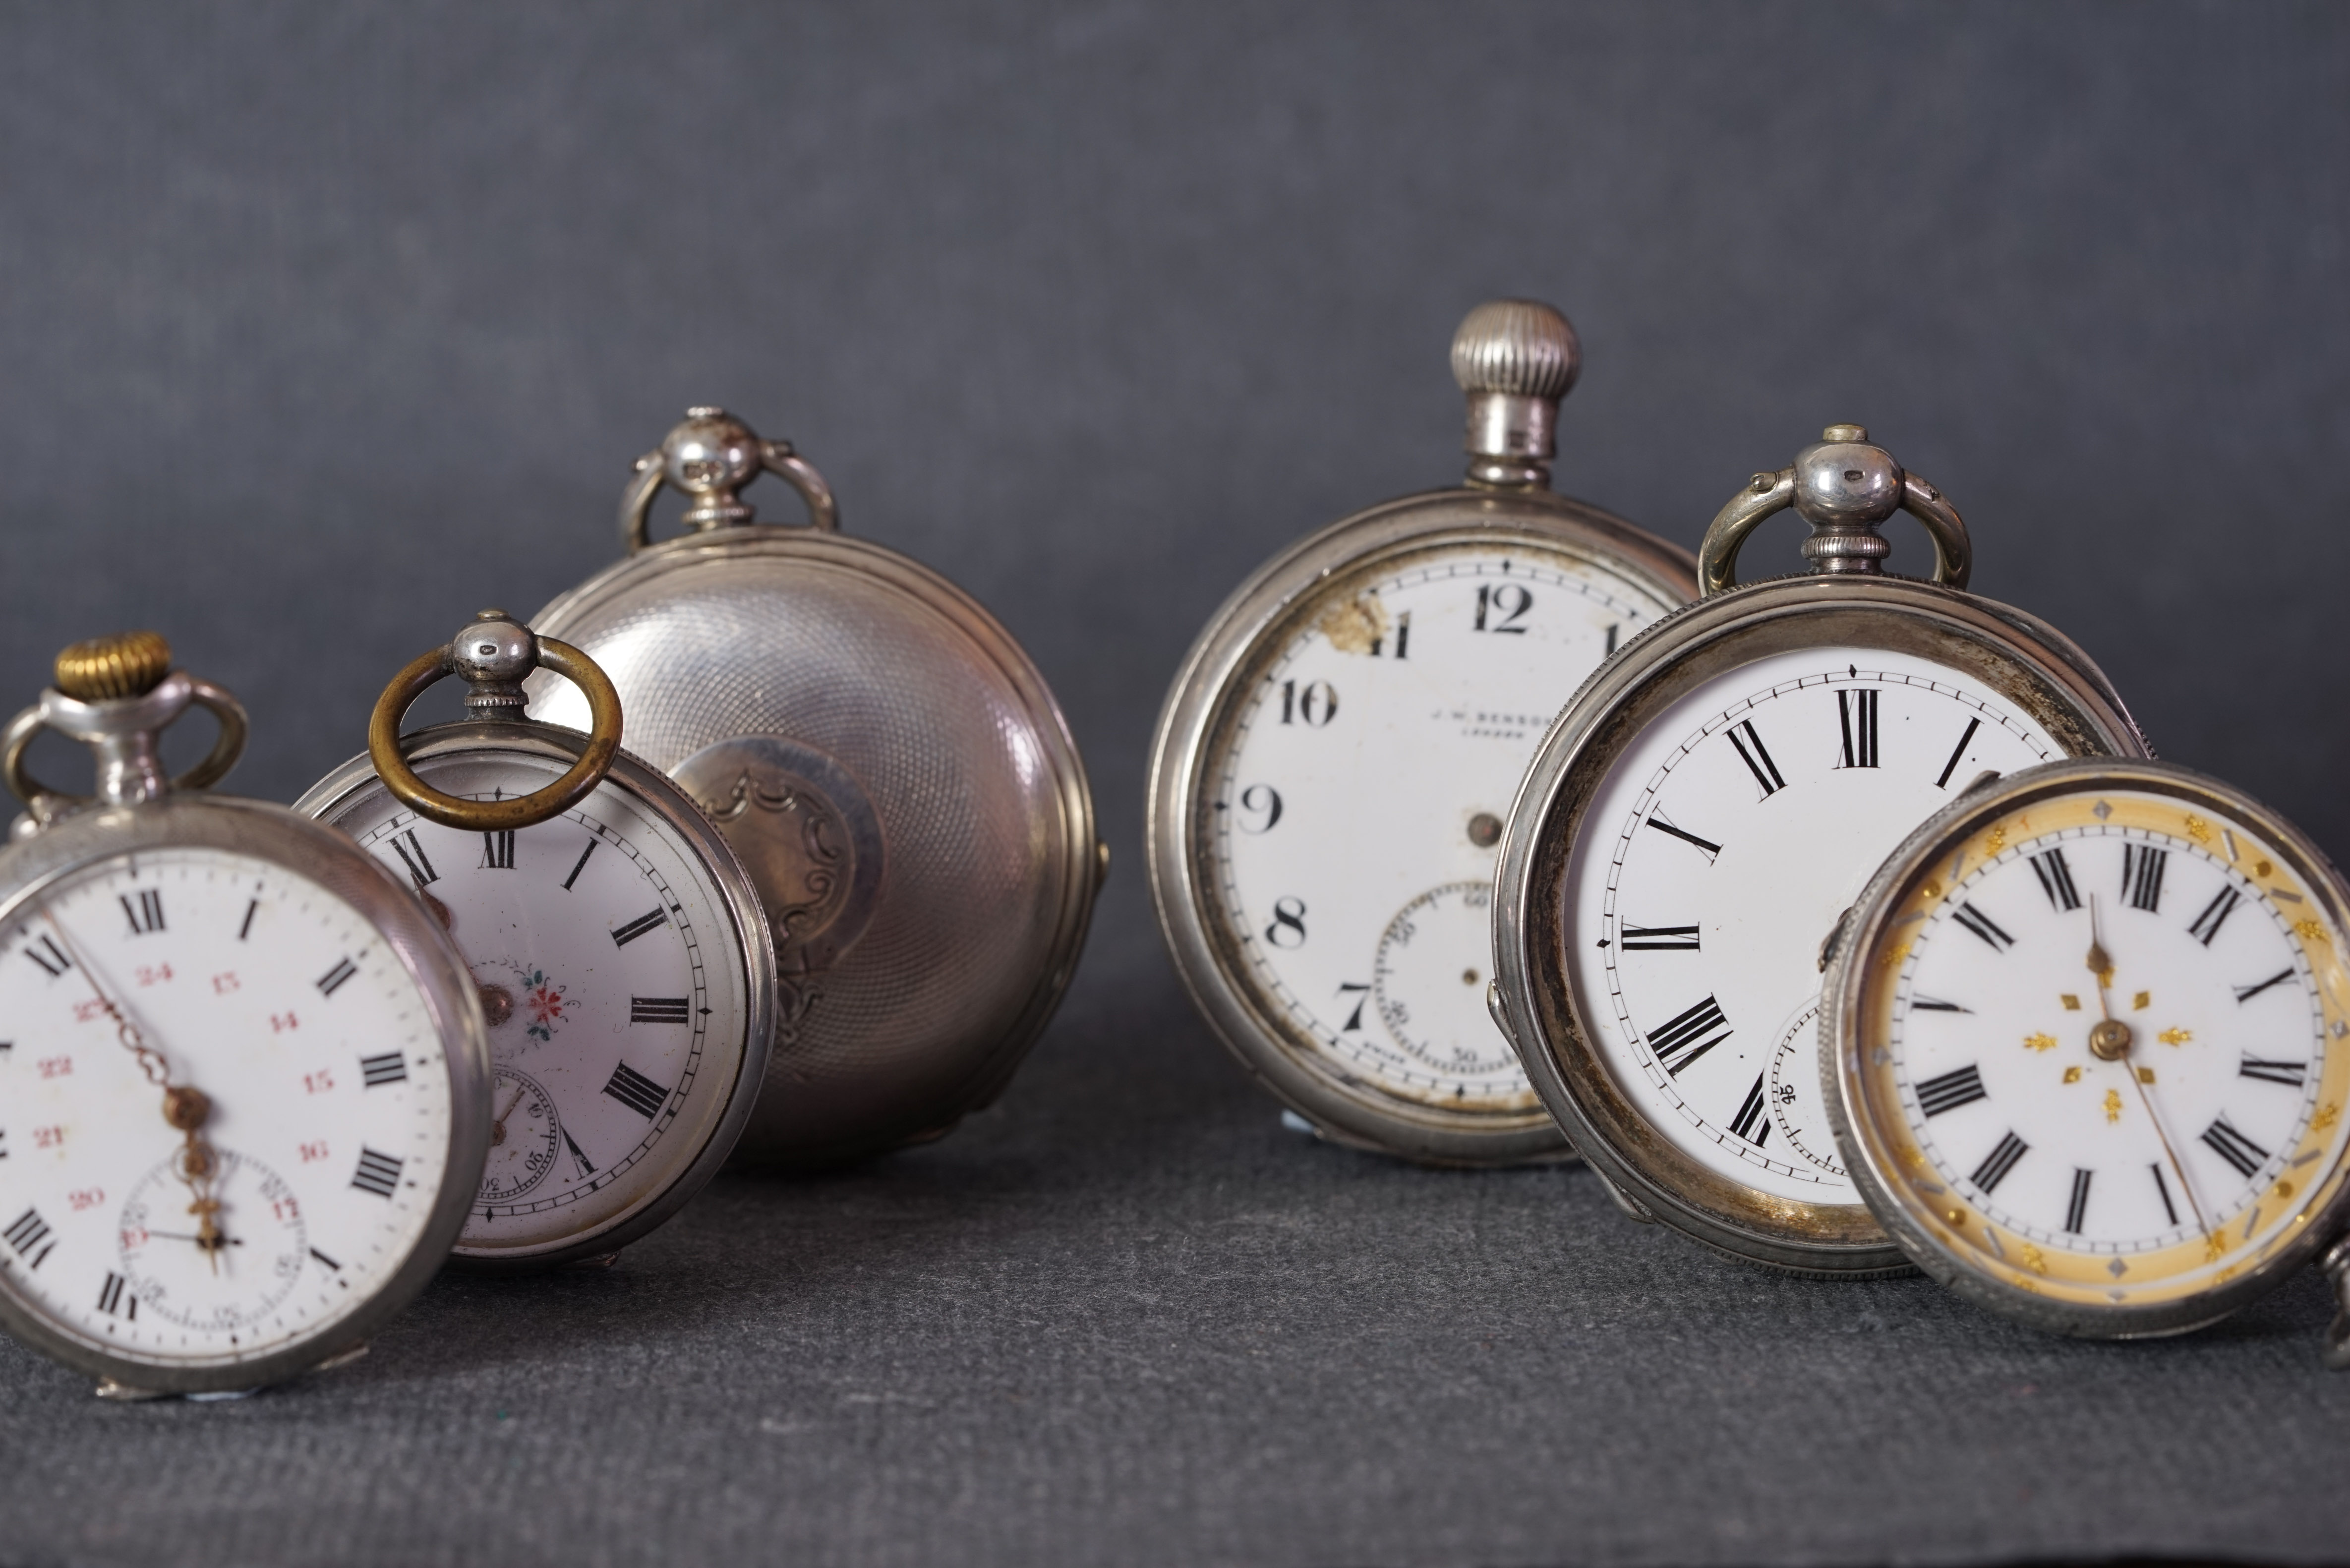 GROUP OF VINTAGE SILVER POCKET WATCHES INCL J W BENSON, a group of 6 vintage pocket watches, all